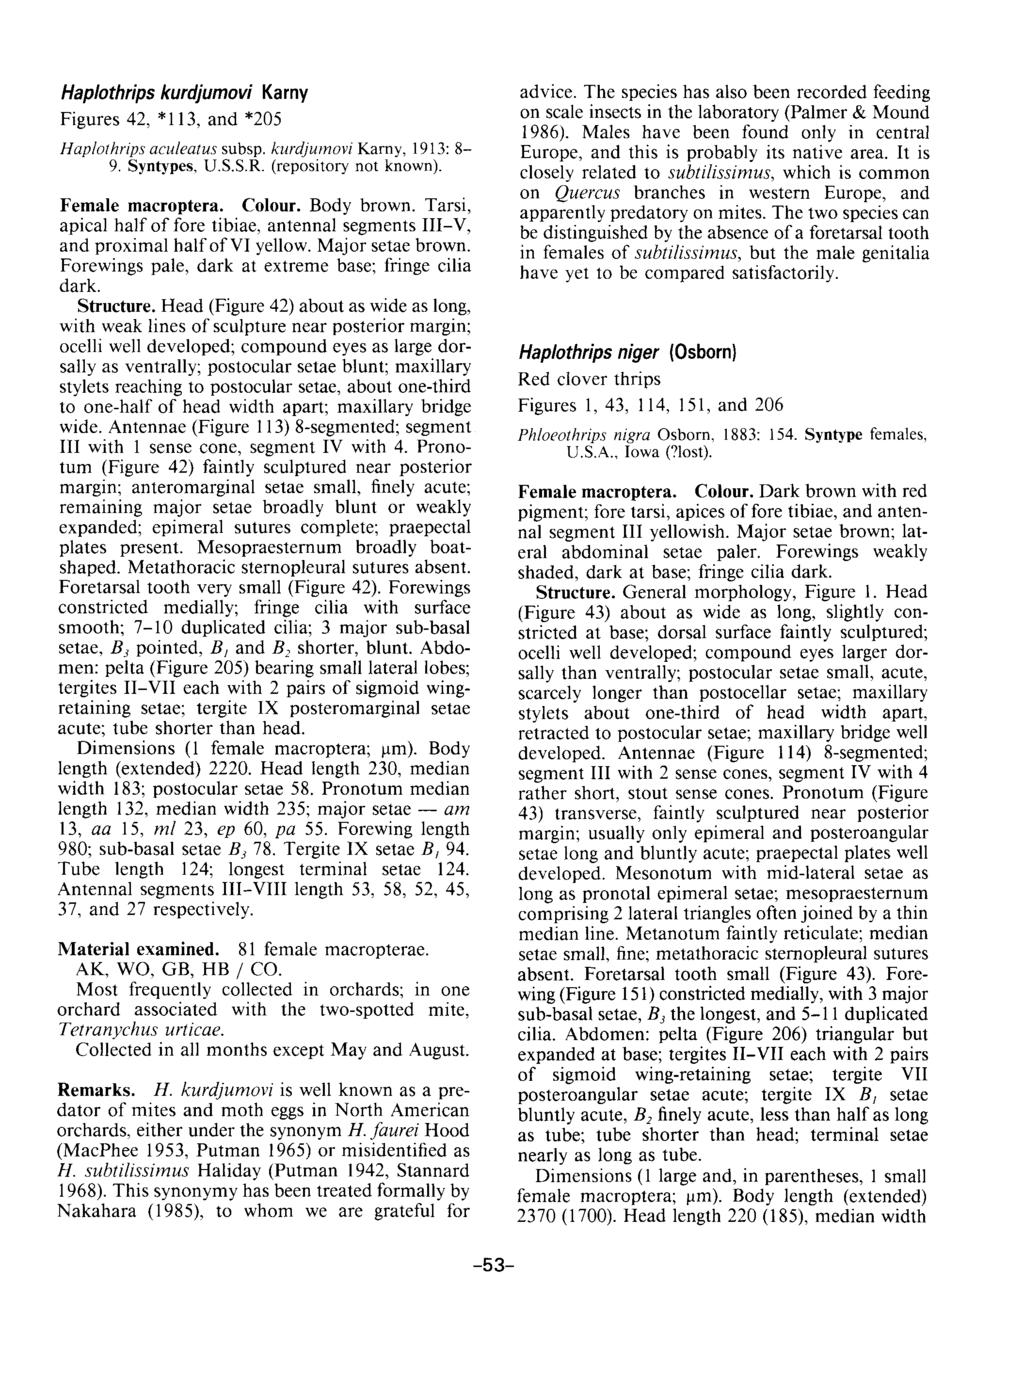 Haplothrips kurdjumovi Karny Figures 42, *113, and *205 Haplothrips aculeatus subsp. kurdjumovi Karny, 1913: 8-9. Syntypes, U.S.S.R. (repository not known). Female macroptera. Colour. Body brown.